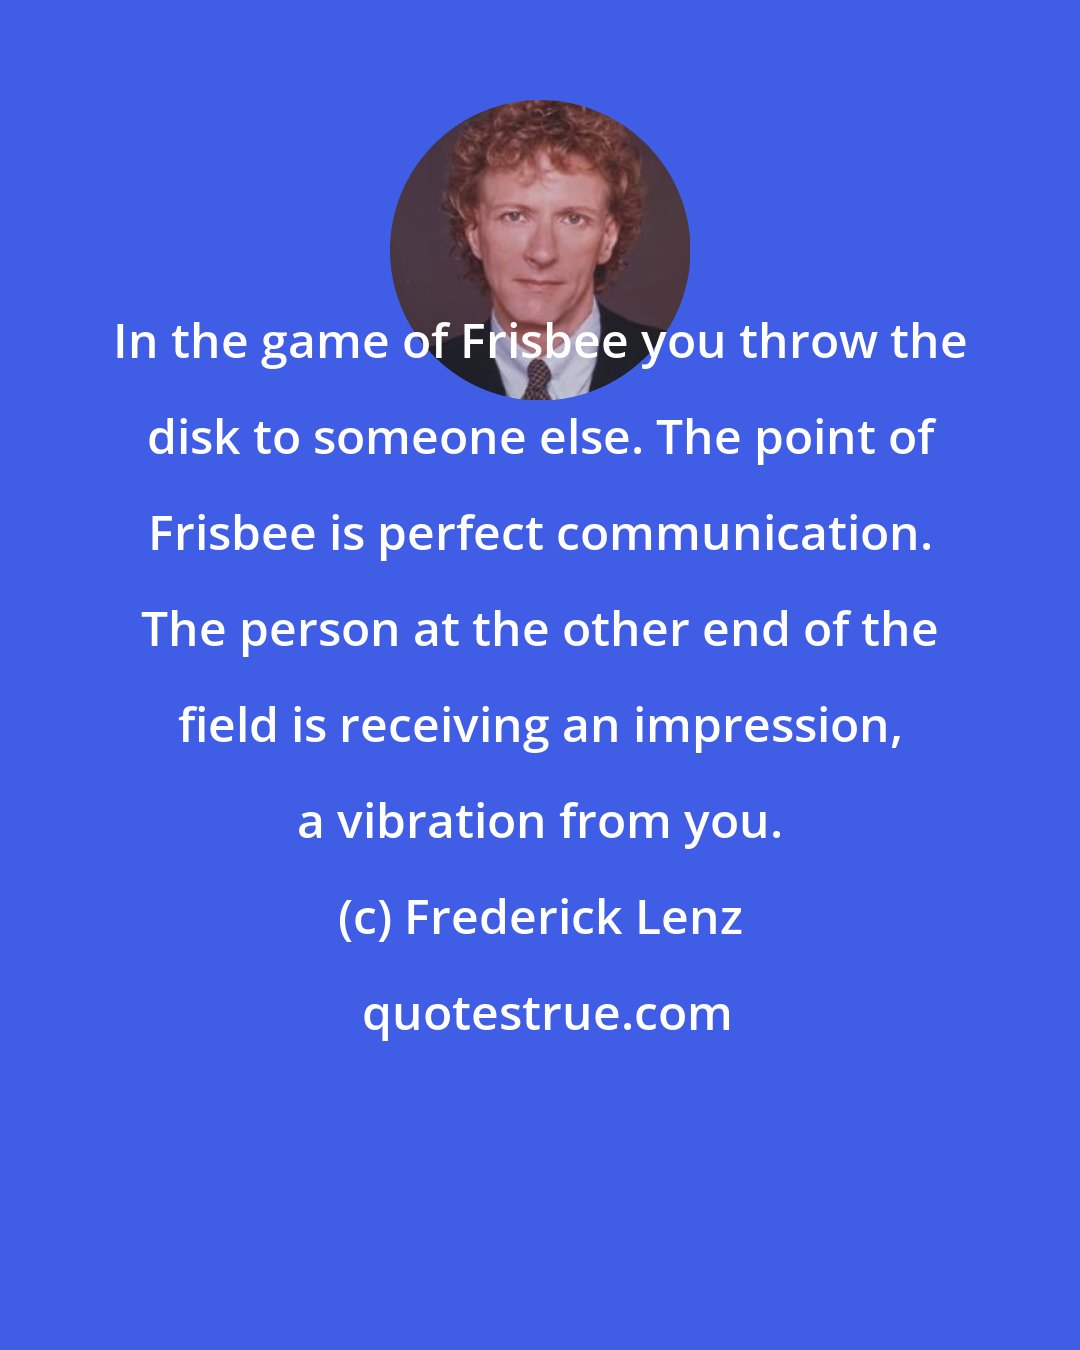 Frederick Lenz: In the game of Frisbee you throw the disk to someone else. The point of Frisbee is perfect communication. The person at the other end of the field is receiving an impression, a vibration from you.